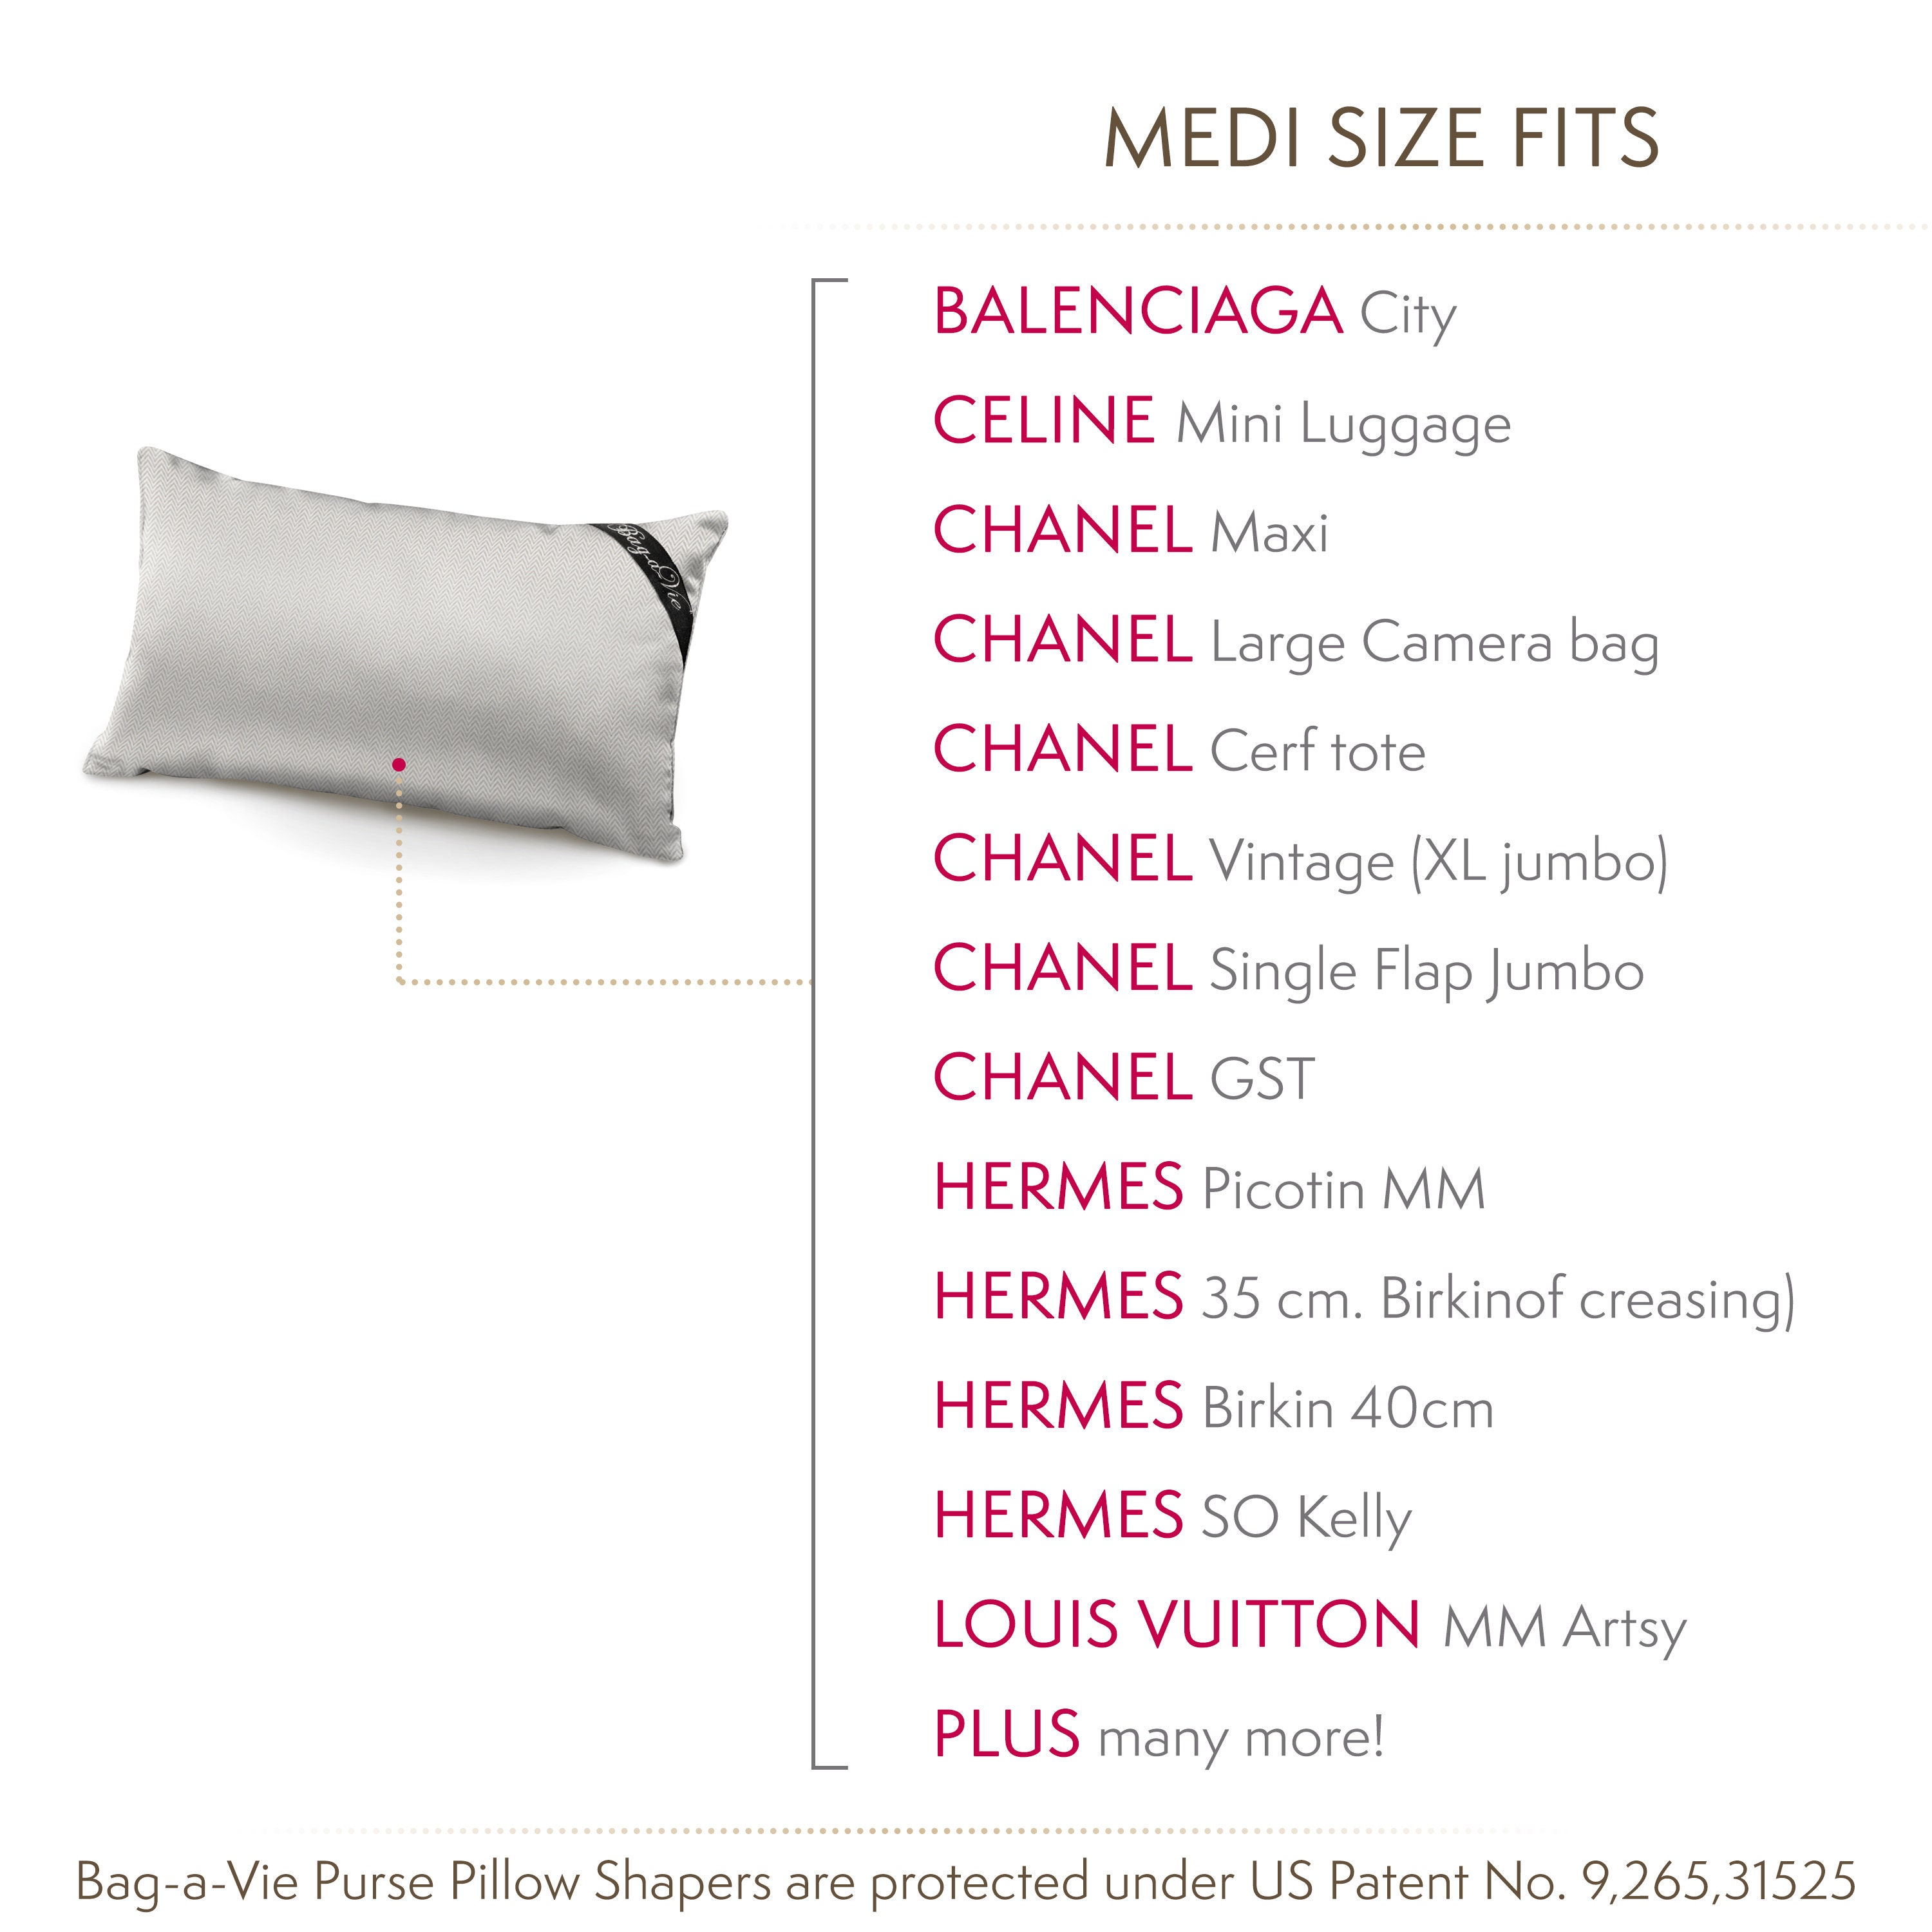 Bag-a-Vie Handbag Purse Shaper Pillows [4-Pack] Made to fit Chanel, Hermes  & More